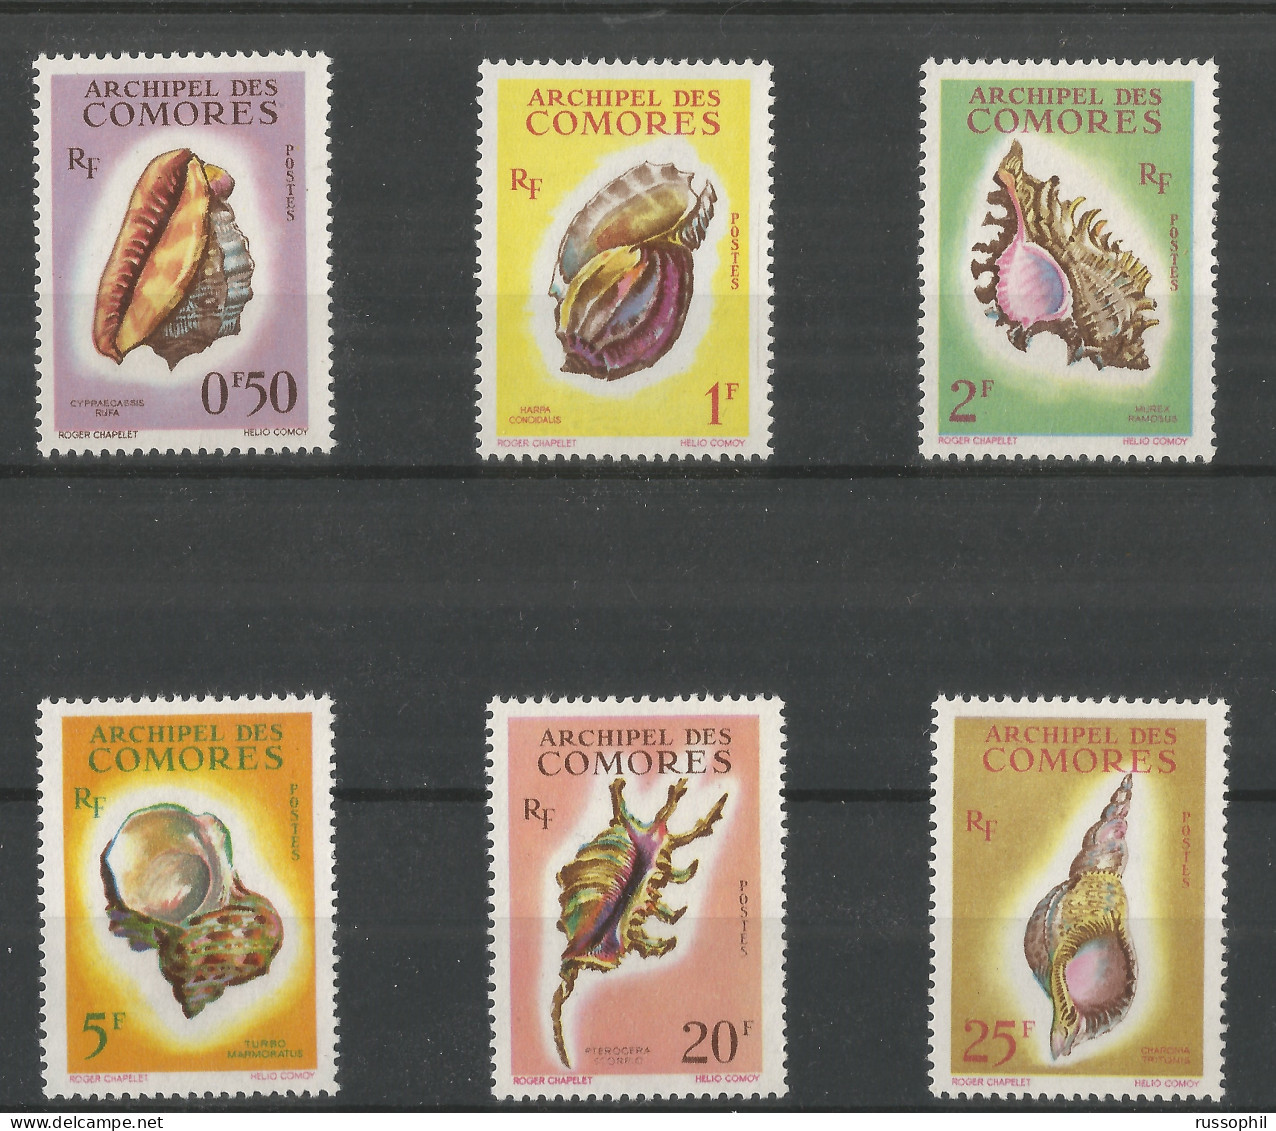 COMORES - COQUILLAGES -  SHELLFISH - Yv. #19 TO Yv. #24 -  (**/MNH) - 1962 - Unused Stamps